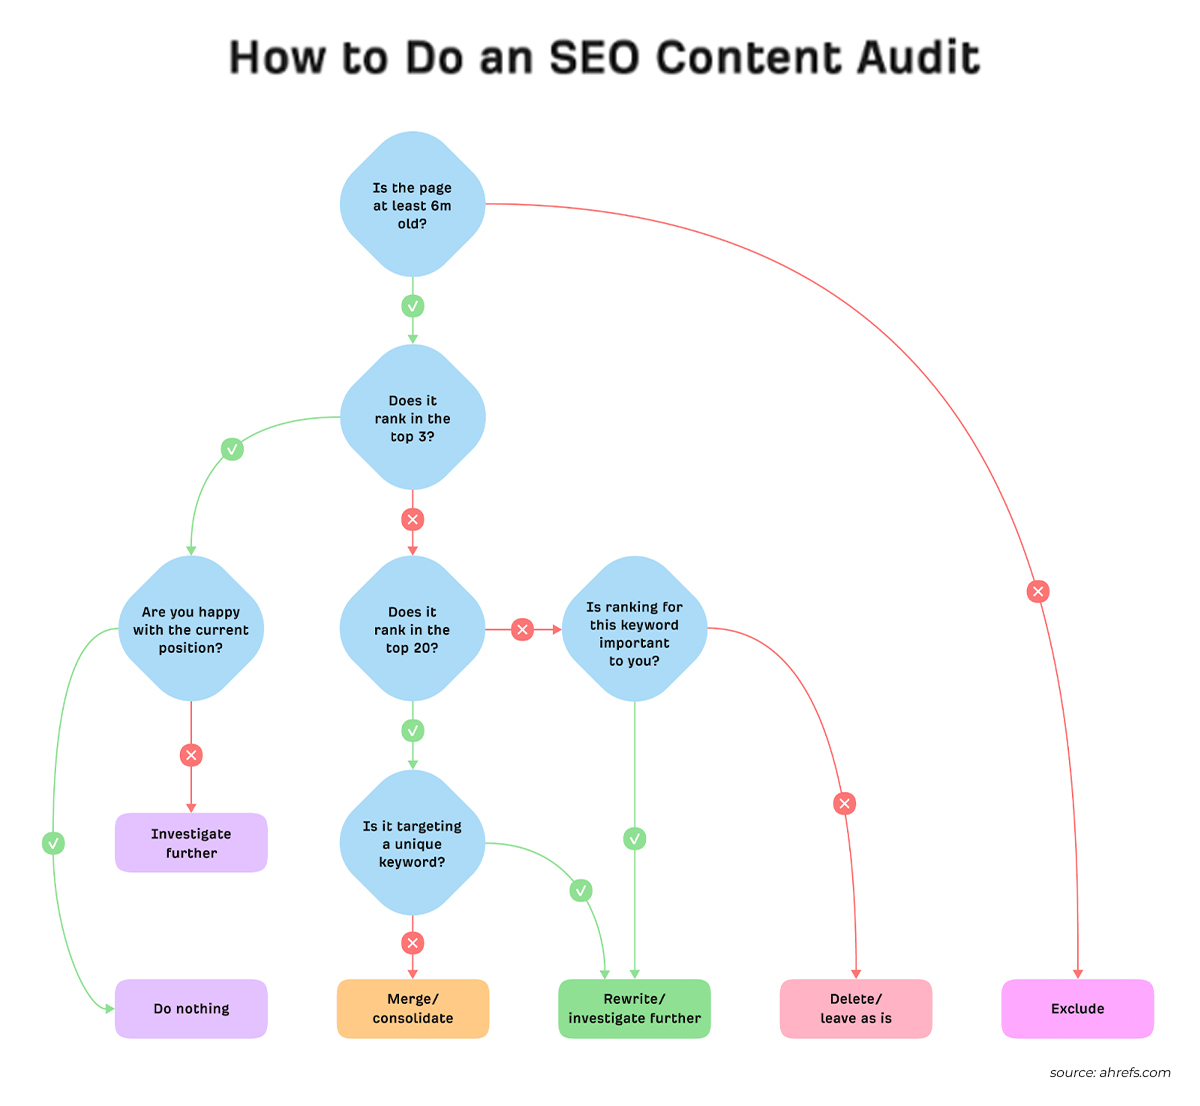 Process for SEO Content Audit for Website